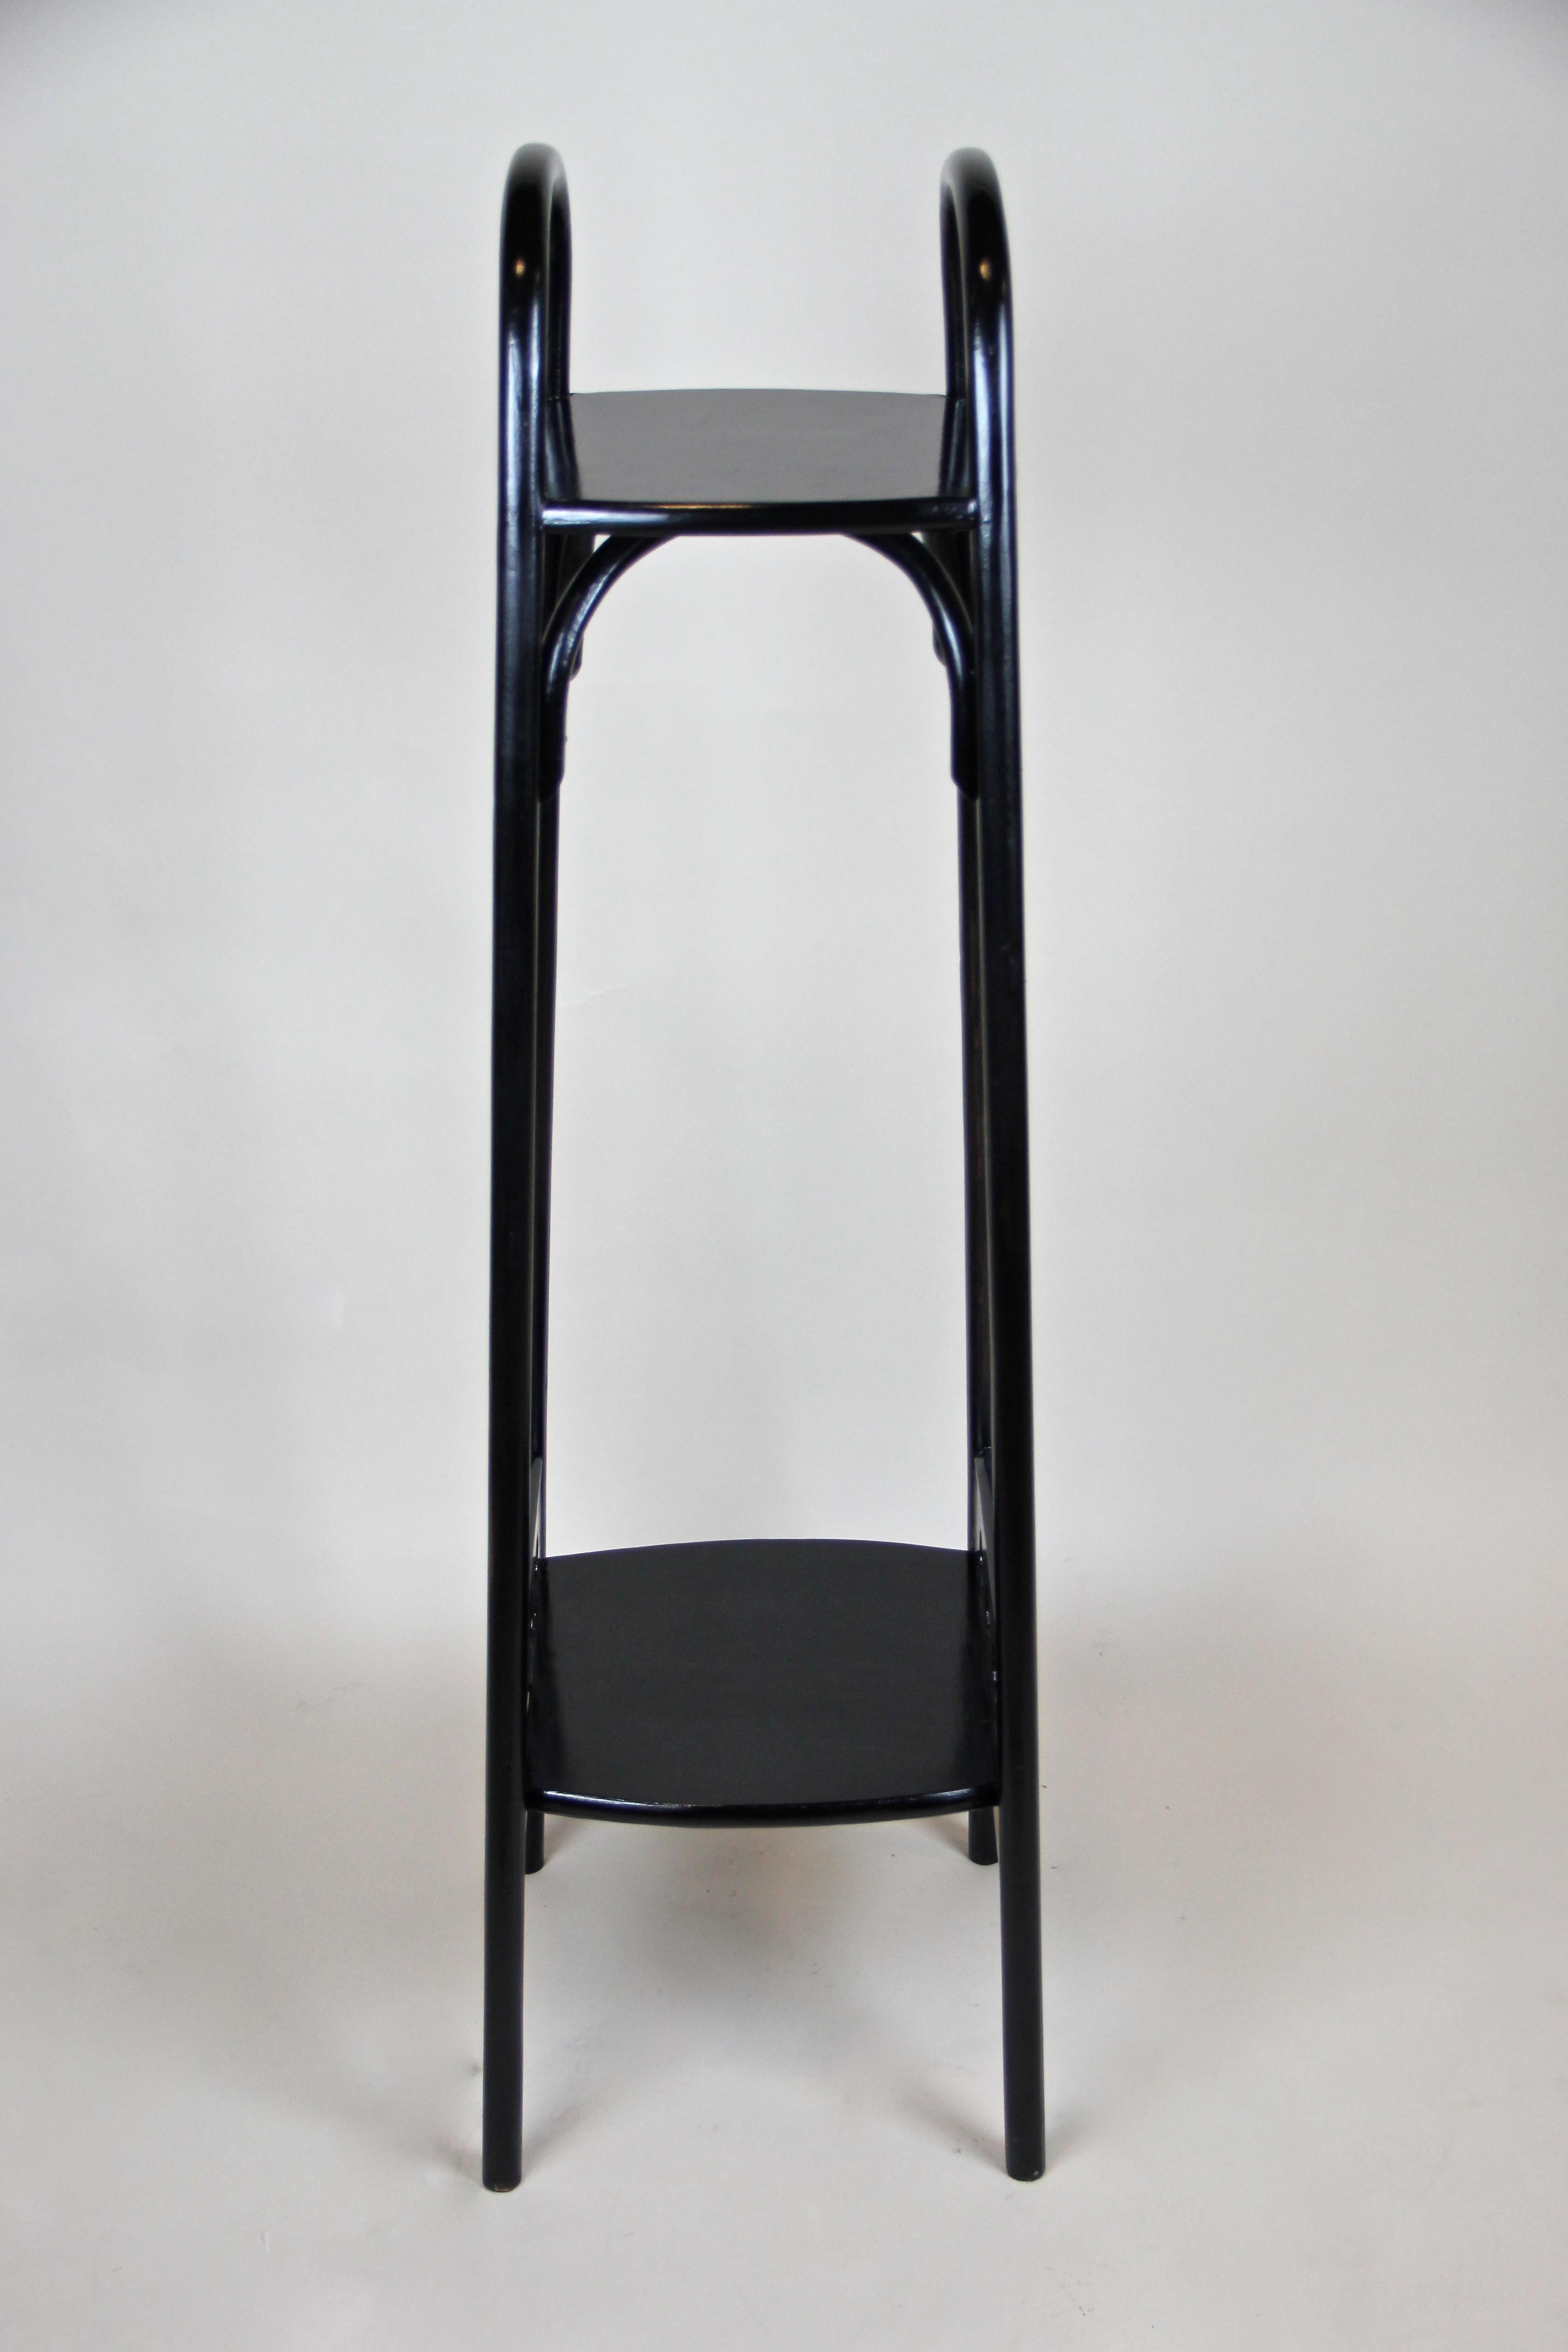 Fine ebonized bentwood pedestal made by the famous company of Thonet Vienna circa 1906. This straight shaped pedestal, Mod.Nr. 9522, provides two levels connected by elegantly bent beechwood. The lower section is highlighted by two perforated design